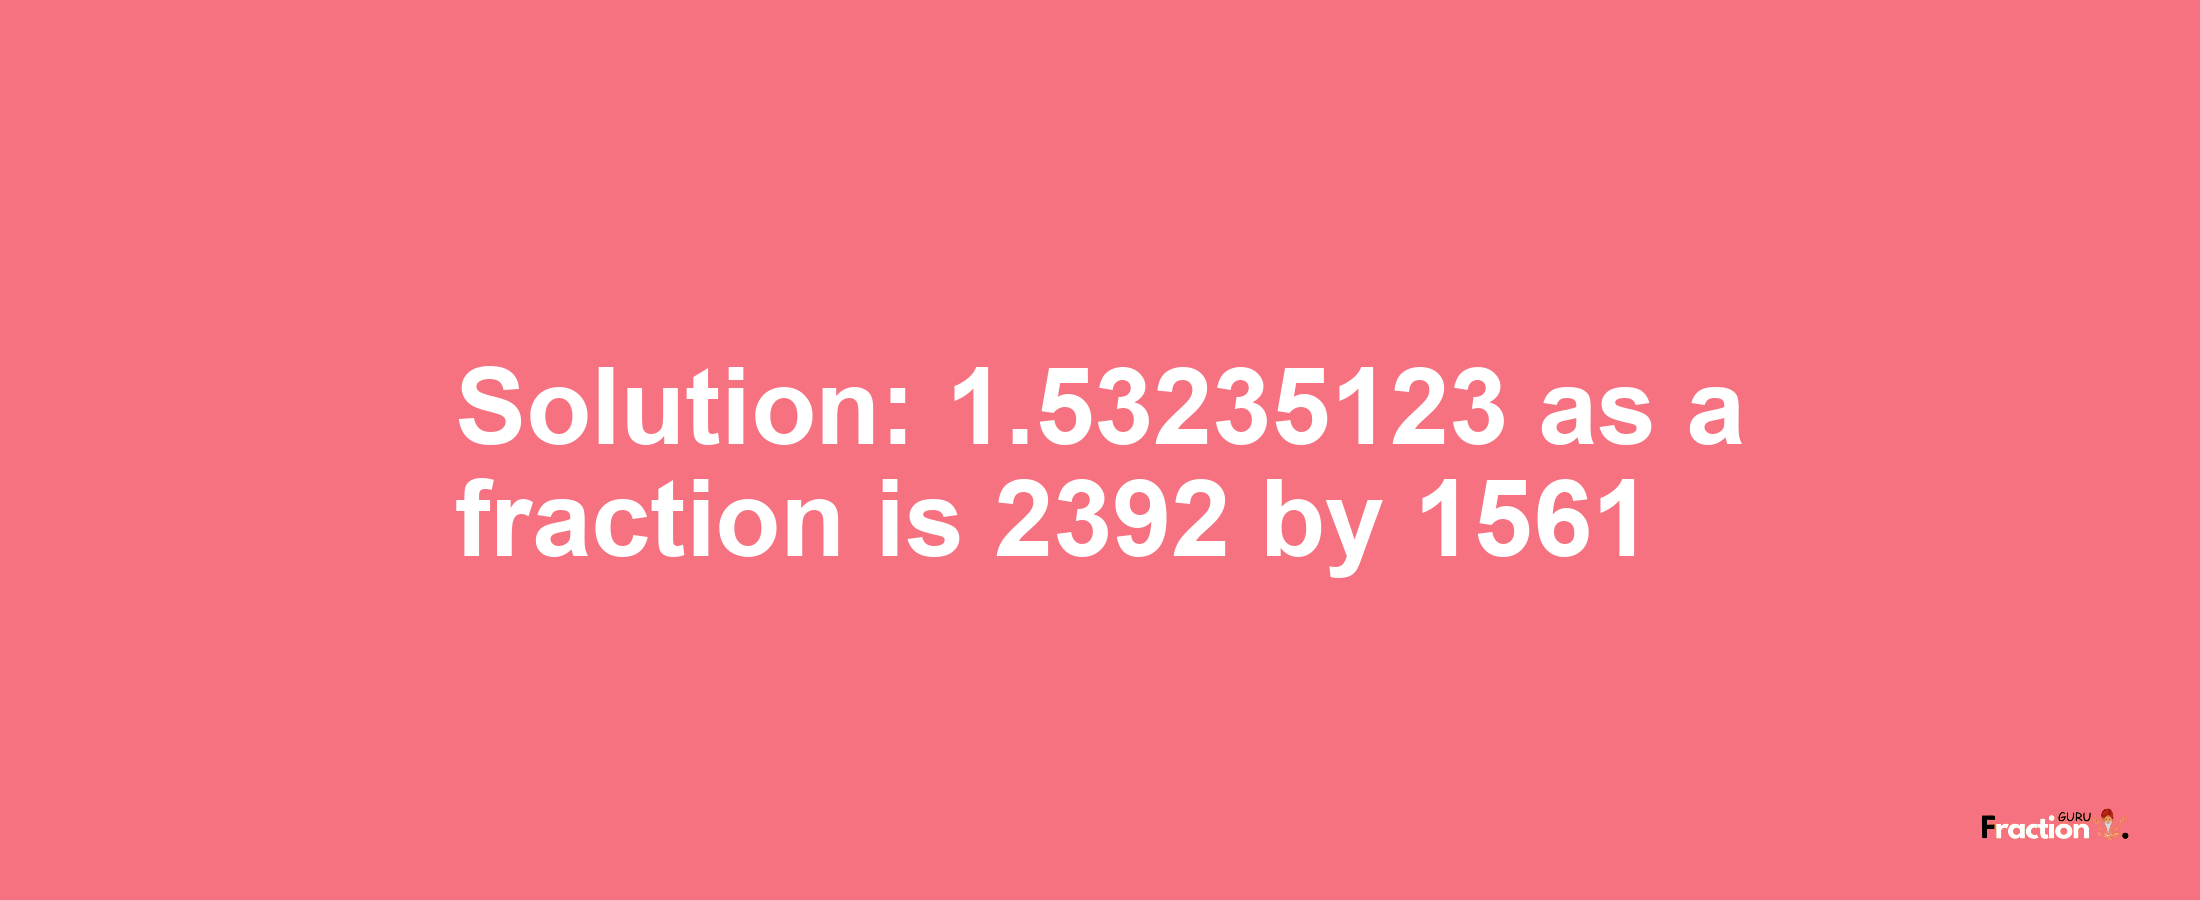 Solution:1.53235123 as a fraction is 2392/1561